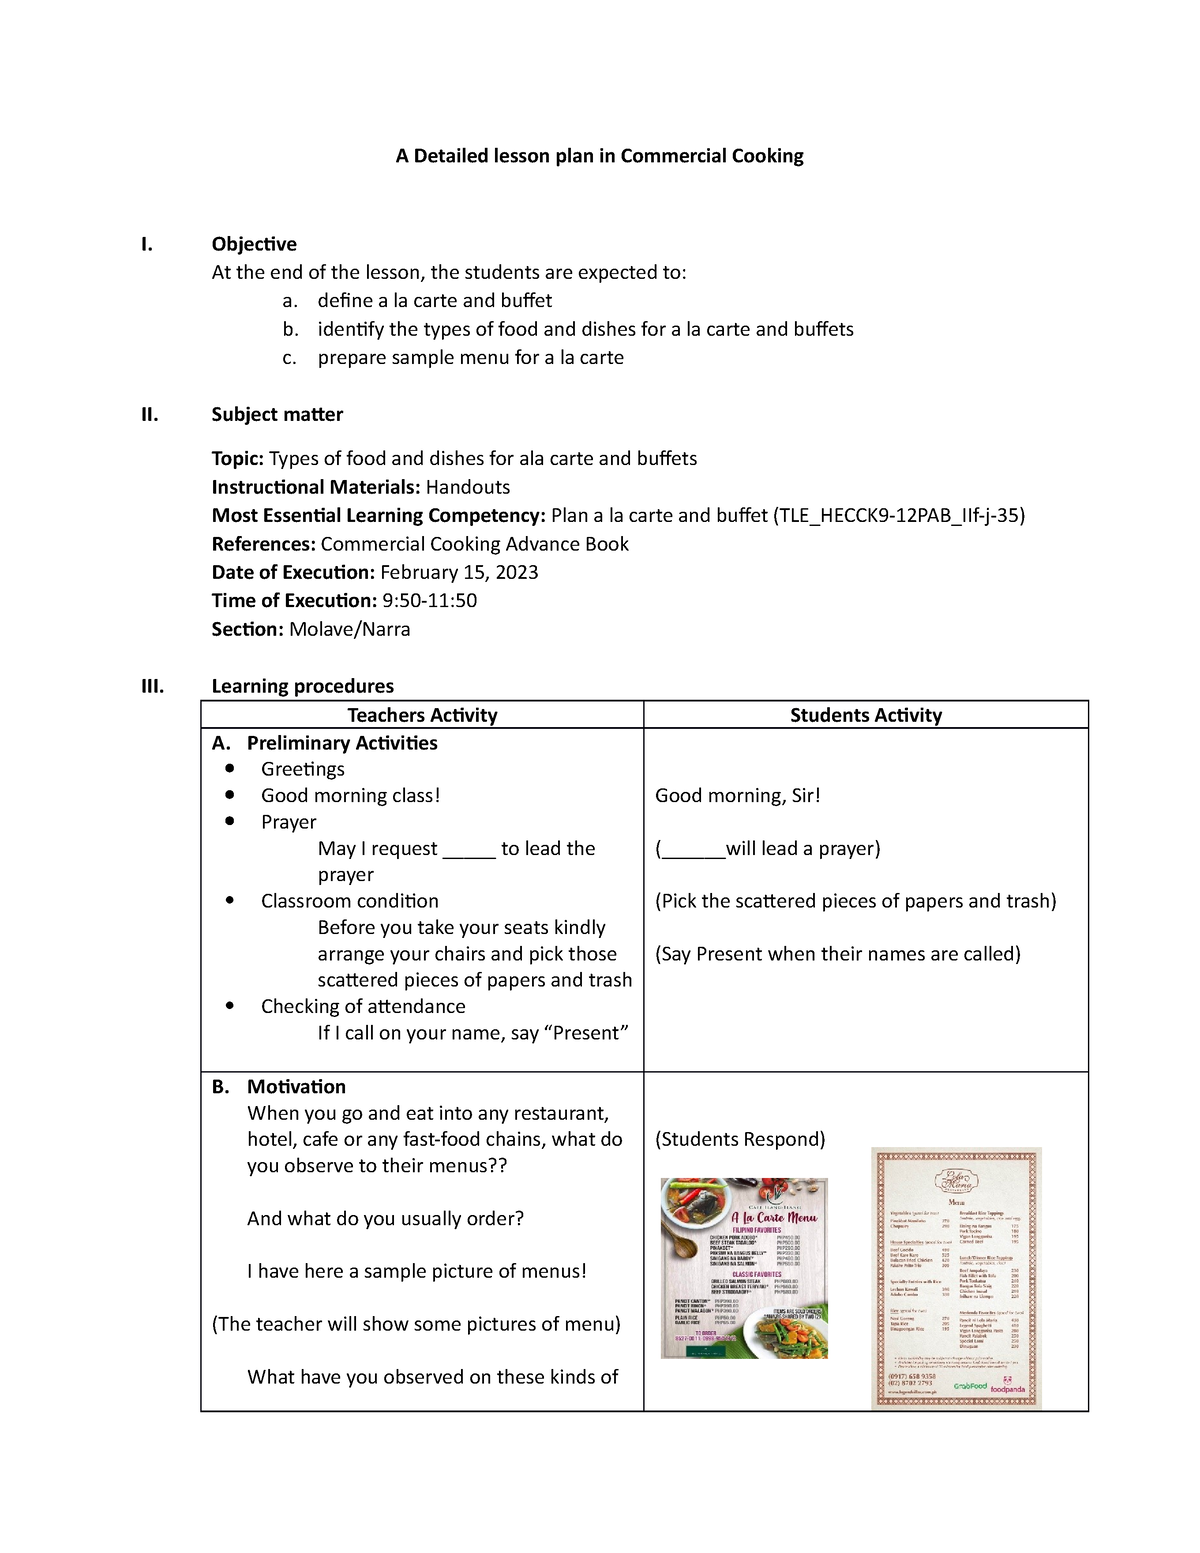 A Detailed lesson plan in Ala carte and buffet - A Detailed lesson plan ...